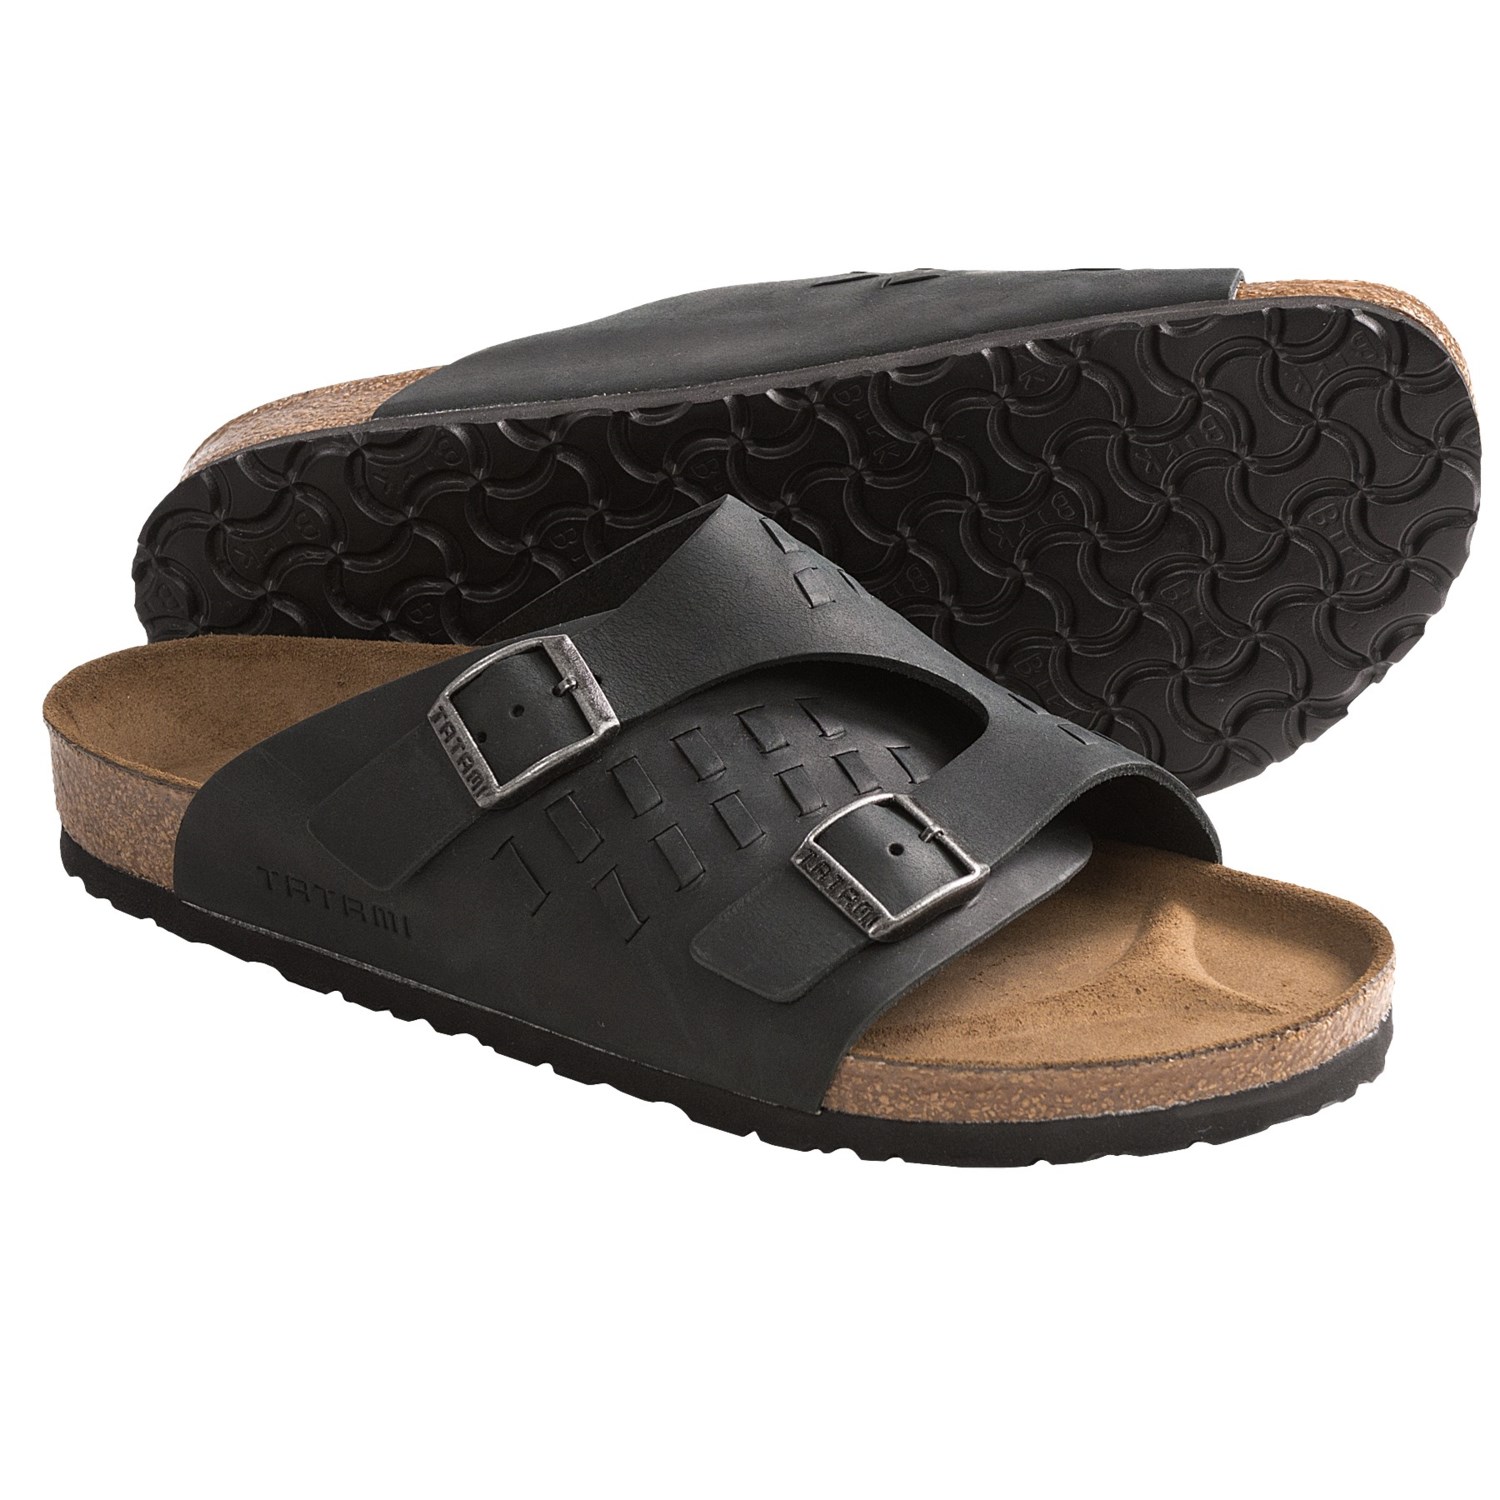 by Birkenstock Zurich Sandals - Oiled Leather (For Men and Women ...